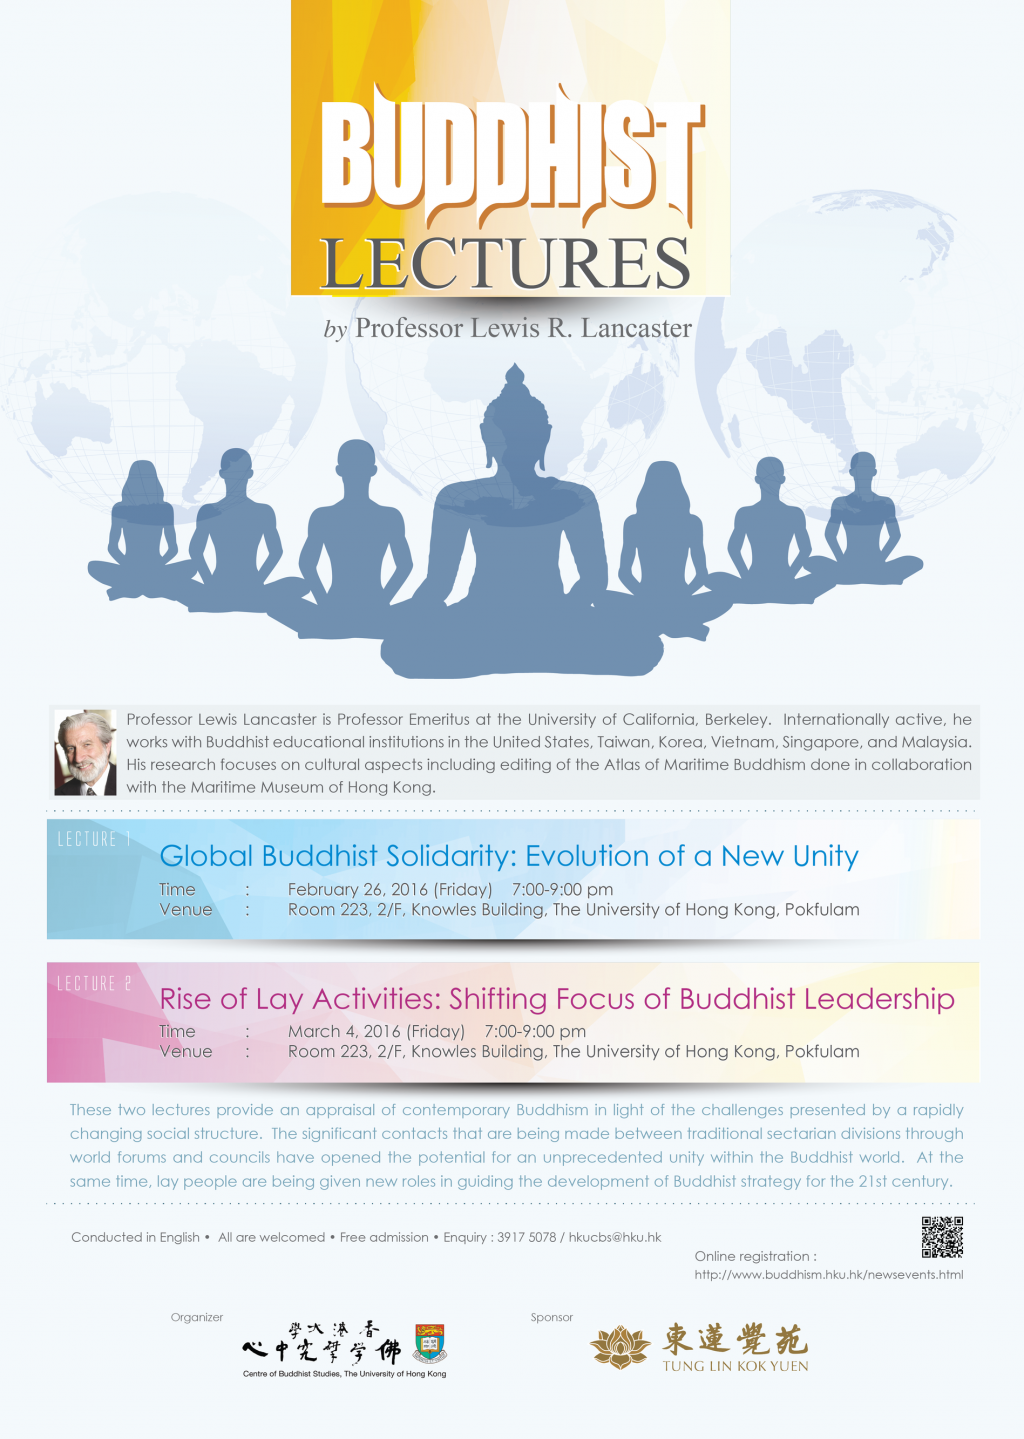 Buddhist Lectures by Professor Lewis R. Lancaster